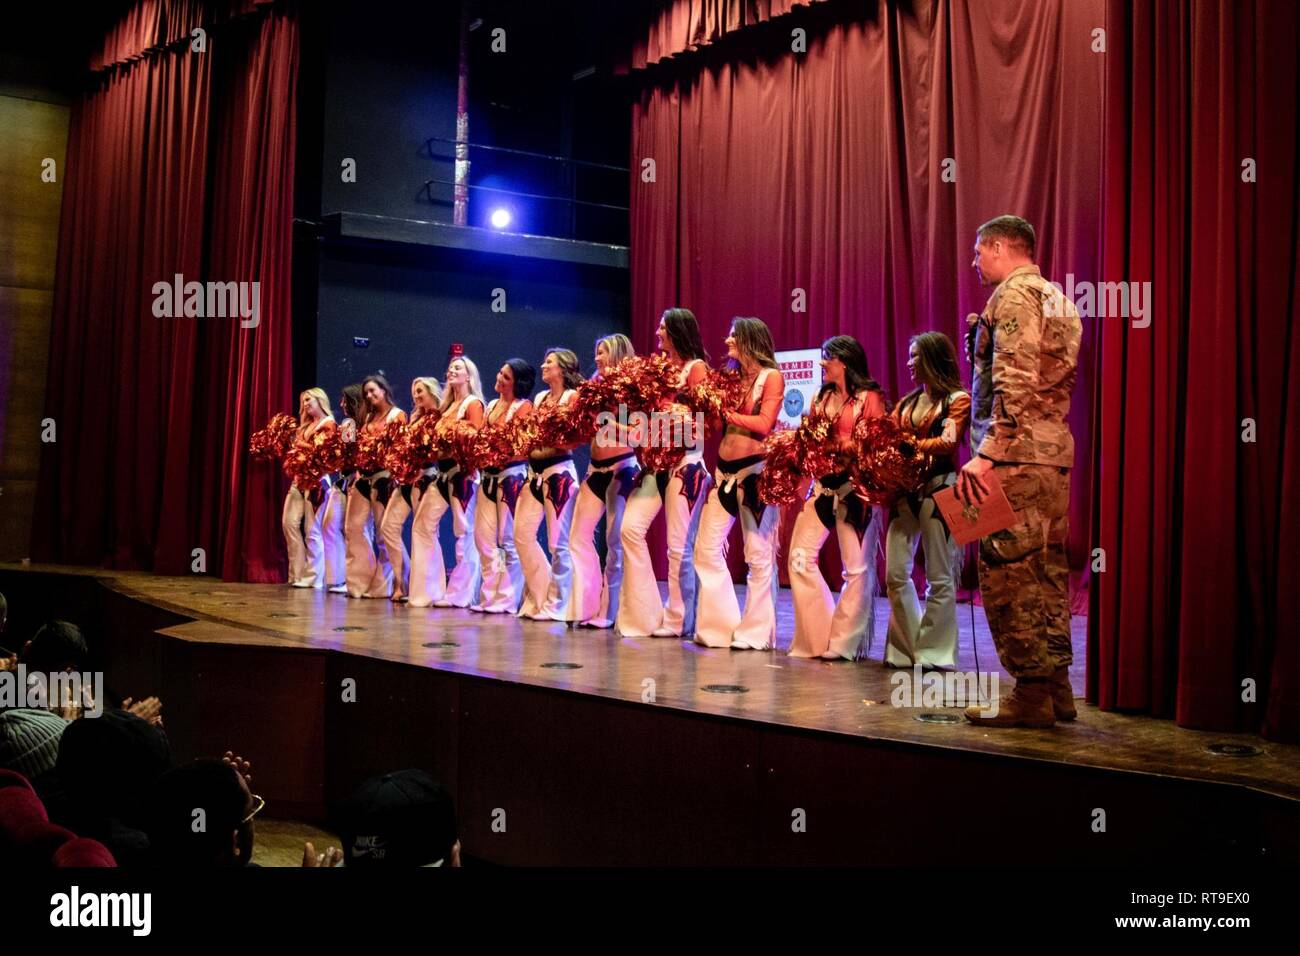 Col. Scott Galloway, the commander of the 4th Combat Aviation Brigade, 4th Infantry Division, thanks and presents a plaque to the Denver Broncos Cheerleaders at the close of their performance as part of the Denver Broncos Pro Blitz Tour, sponsored by Armed Forces Entertainment, at the theater in Illesheim, Germany, Jan. 28, 2019.    The Denver Broncos Pro Blitz Tour featuring the Denver Broncos Cheerleaders, Miles the team mascot and former players, is orchestrated by Armed Forces Entertainment in order to provide the best unique entertainment to U.S. troops and family members stationed overse Stock Photo